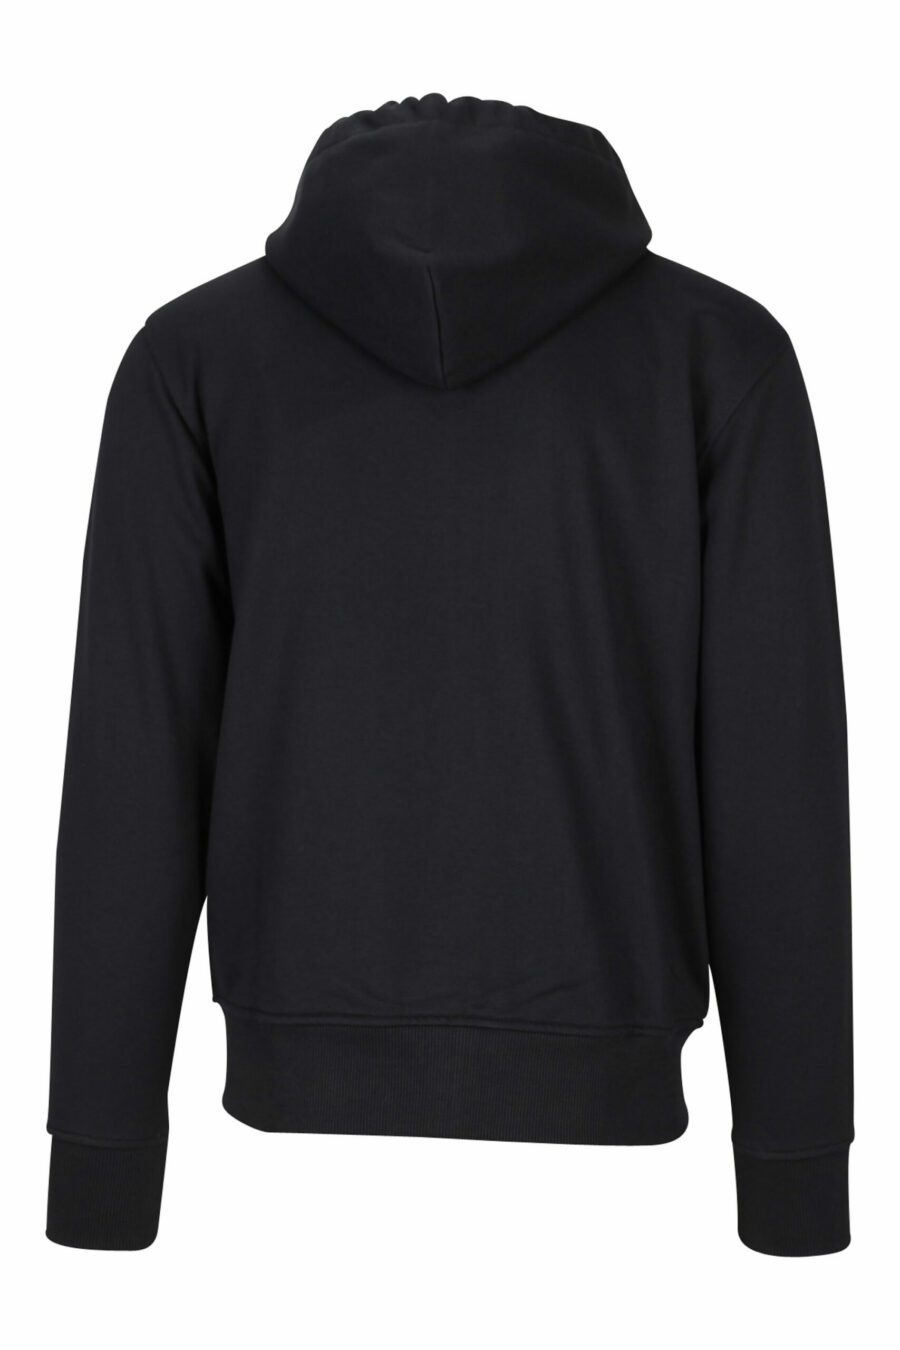 Black hooded sweatshirt with white "piece number" logo - 8052019469653 1 scaled